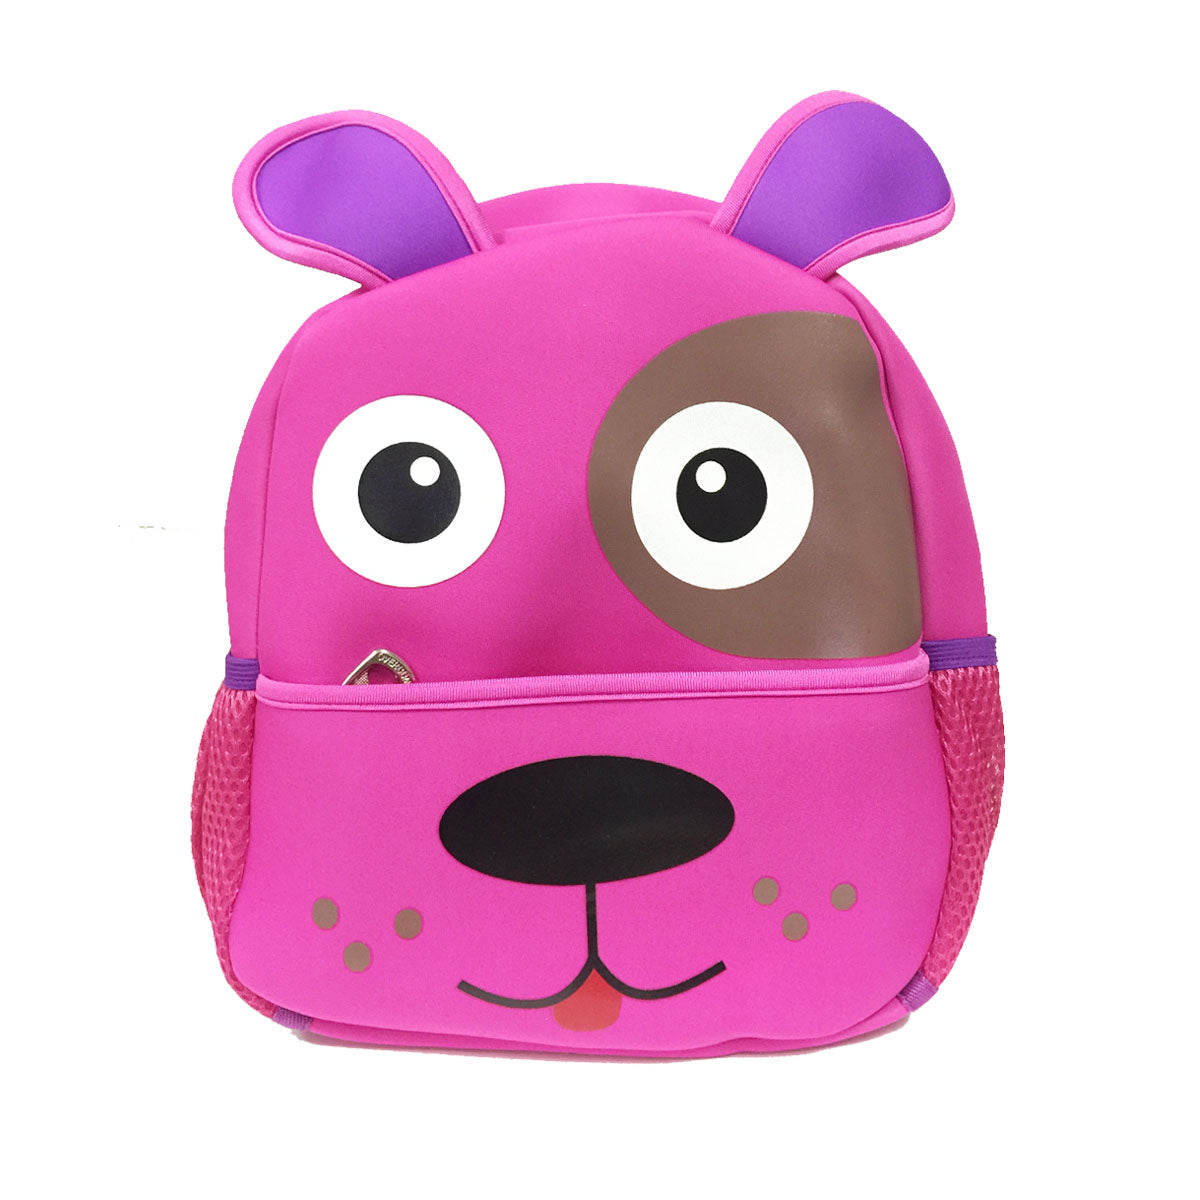 Wrapables Neoprene Fun Pals Backpack for Toddlers